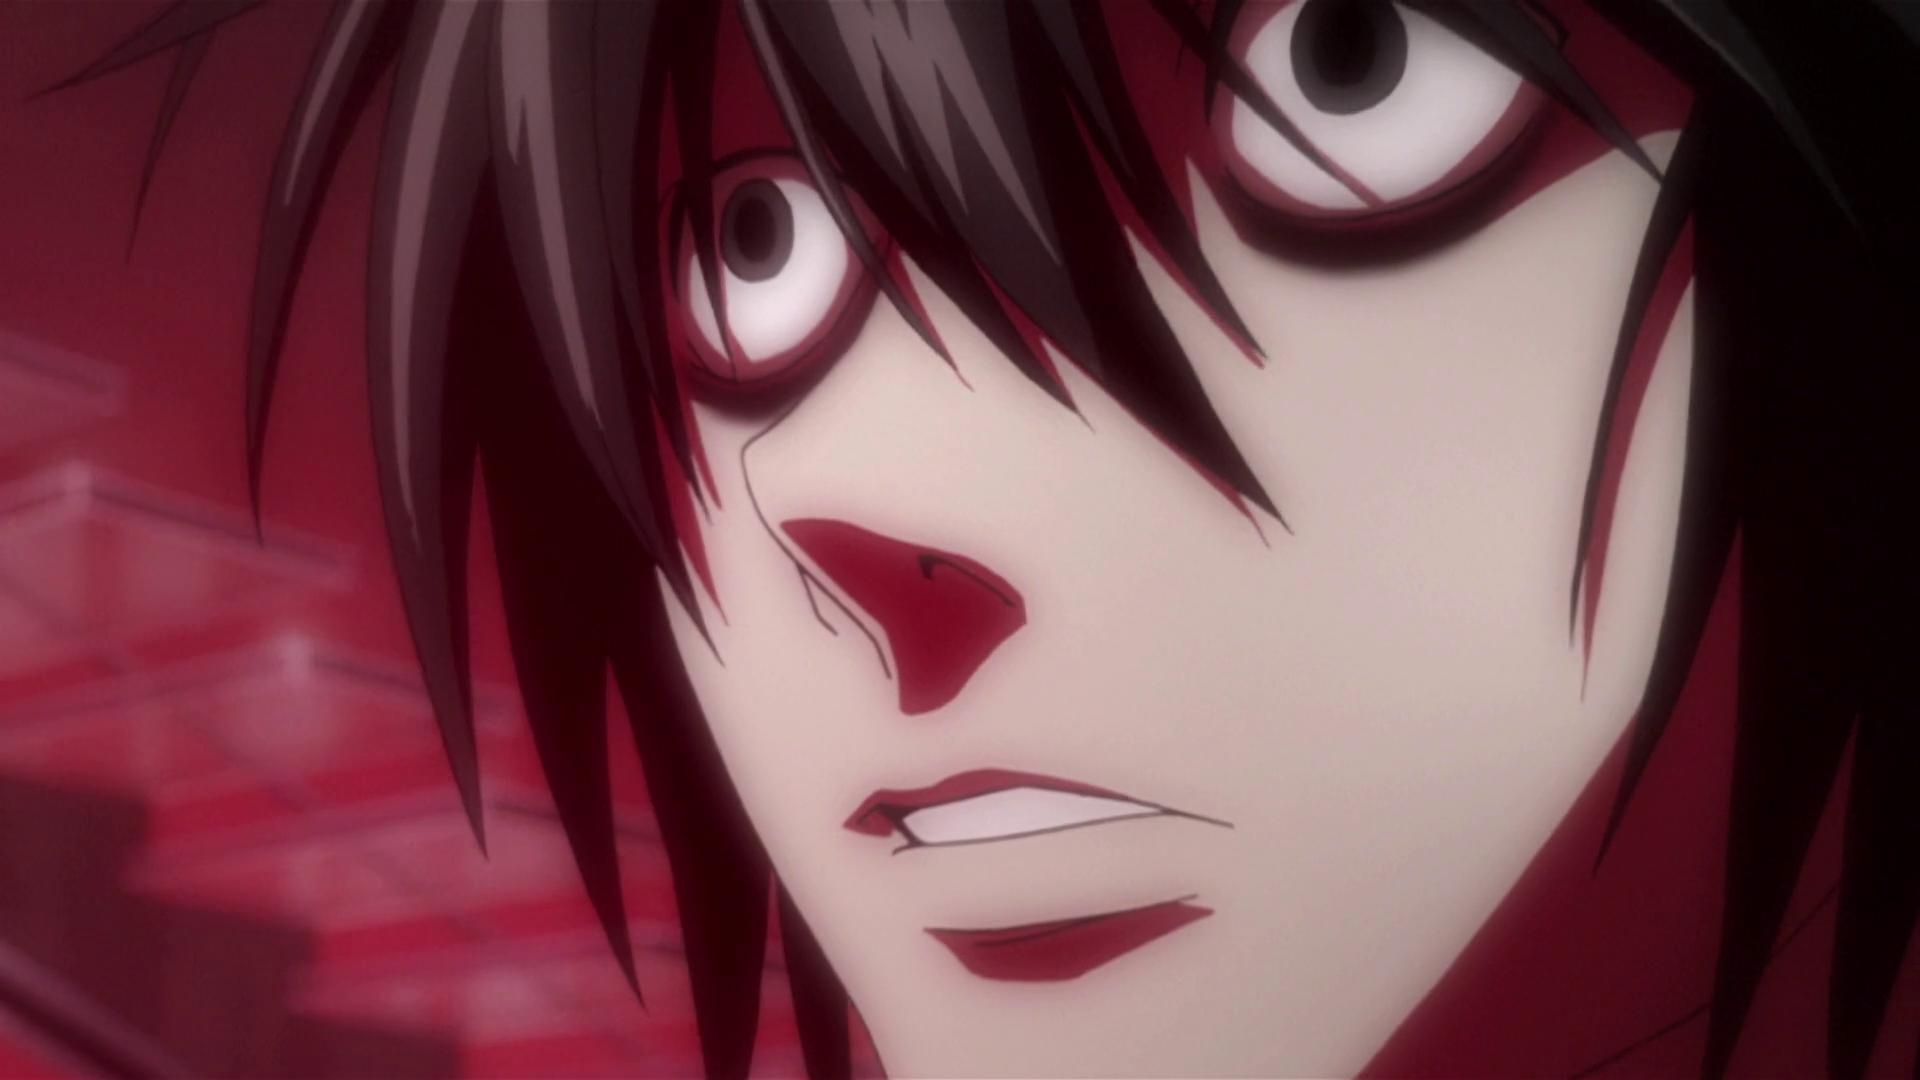 Why was Light from Death Note shown in Death Parade? Was it just